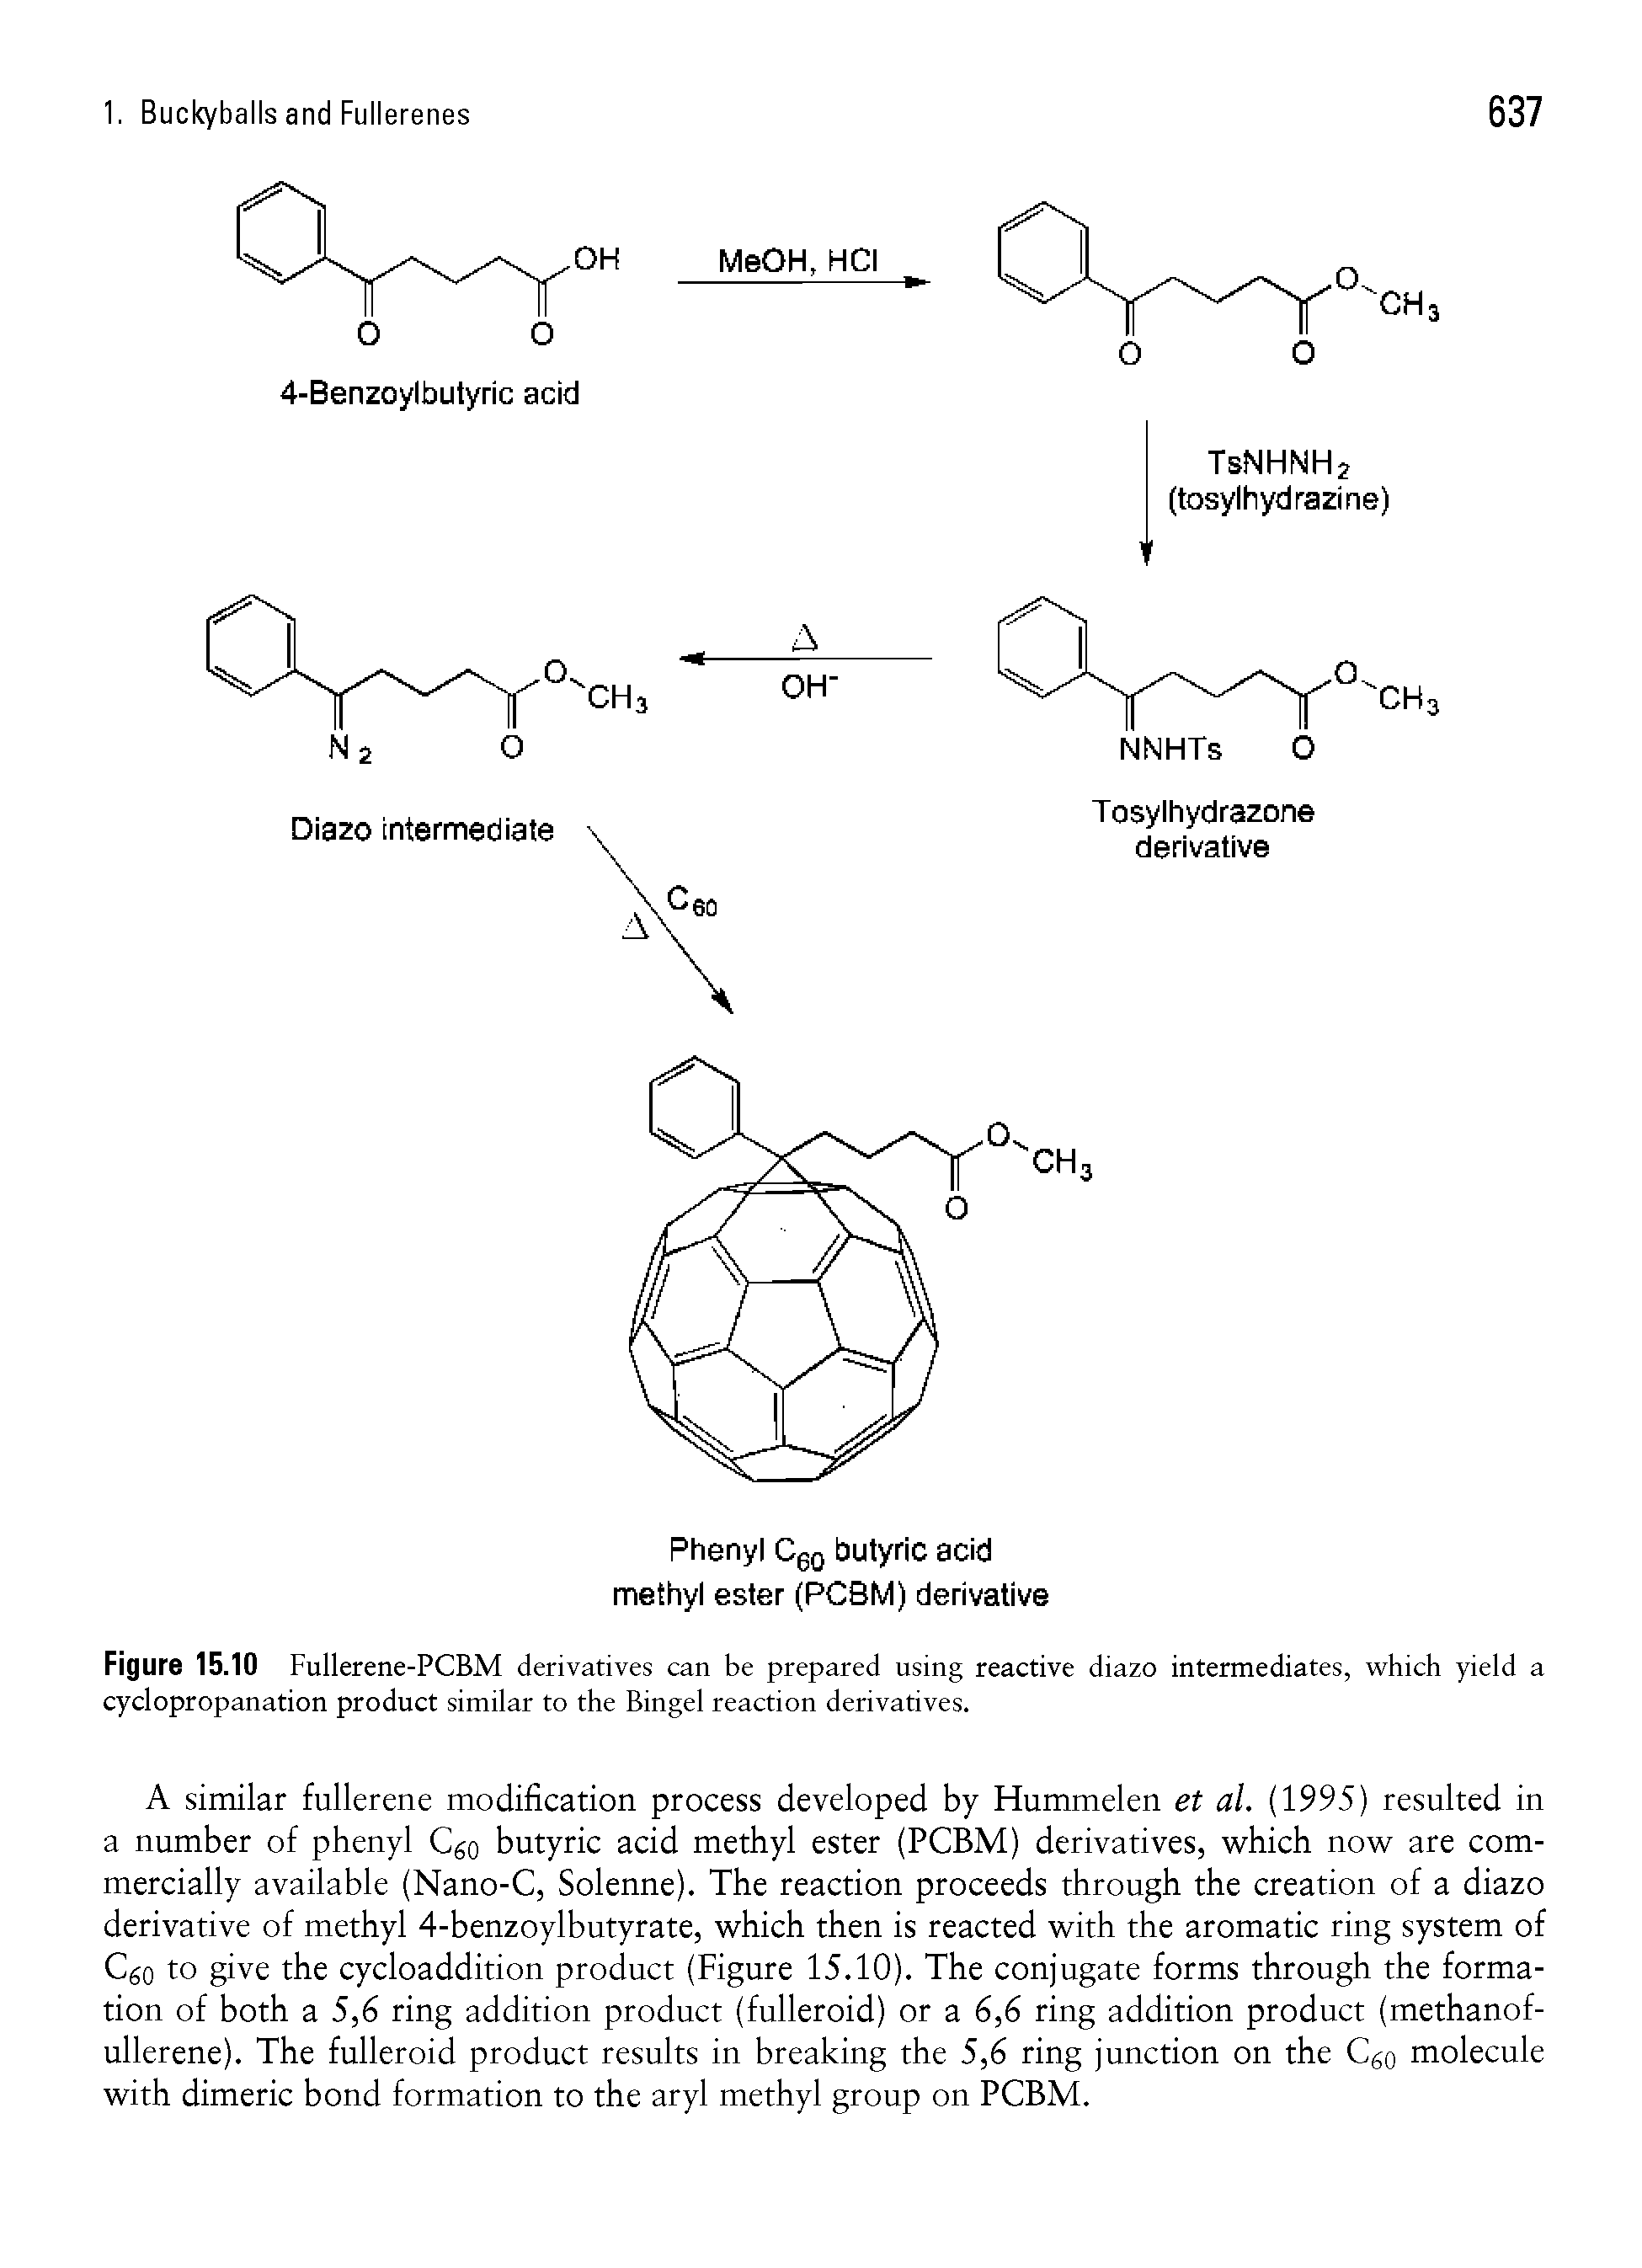 Figure 15.10 Fullerene-PCBM derivatives can be prepared using reactive diazo intermediates, which yield a cyclopropanation product similar to the Bingel reaction derivatives.